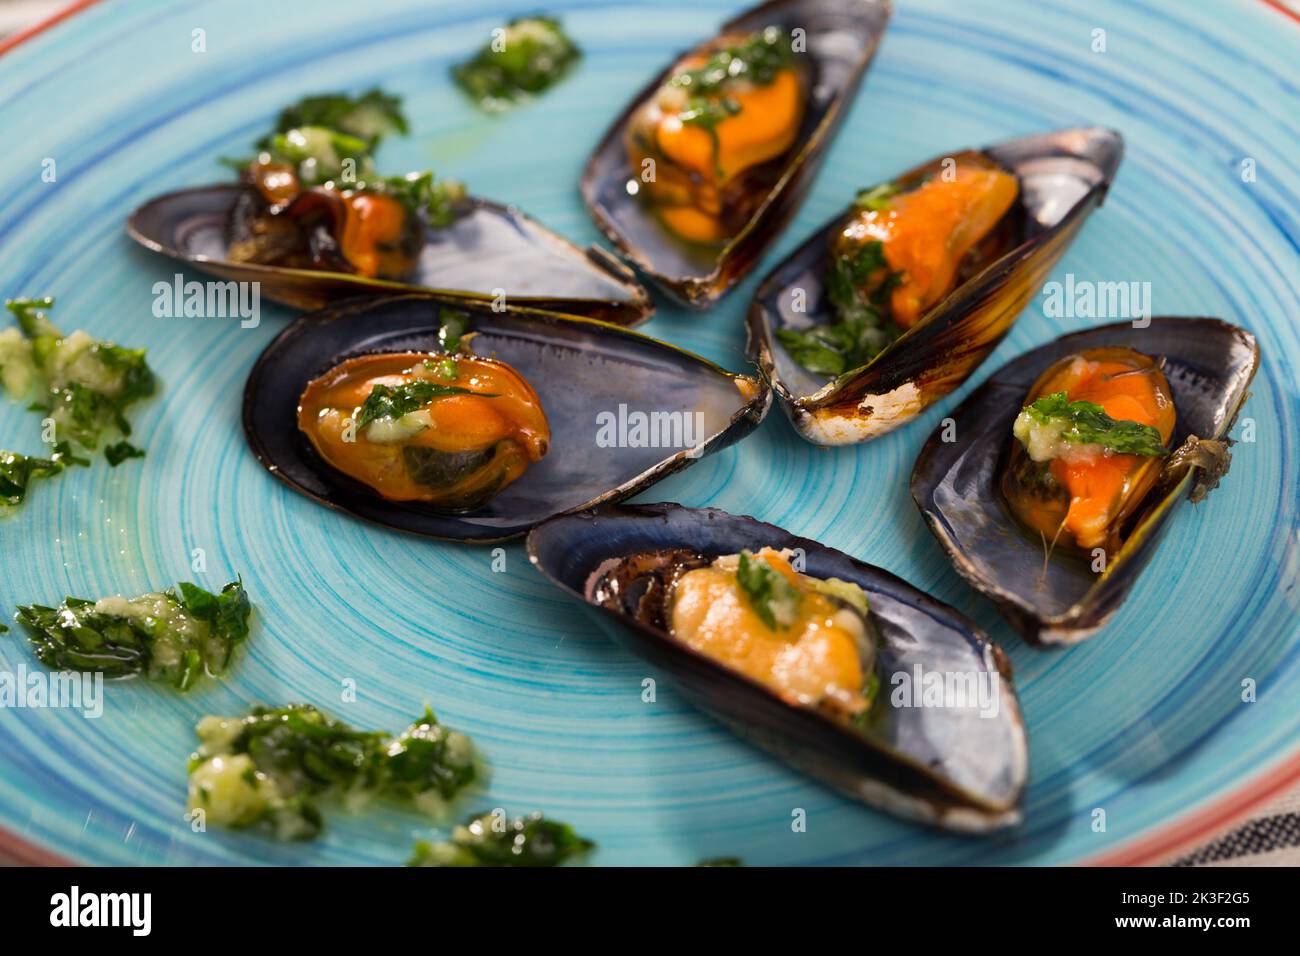 Steamed mussels on blue plate Stock Photo